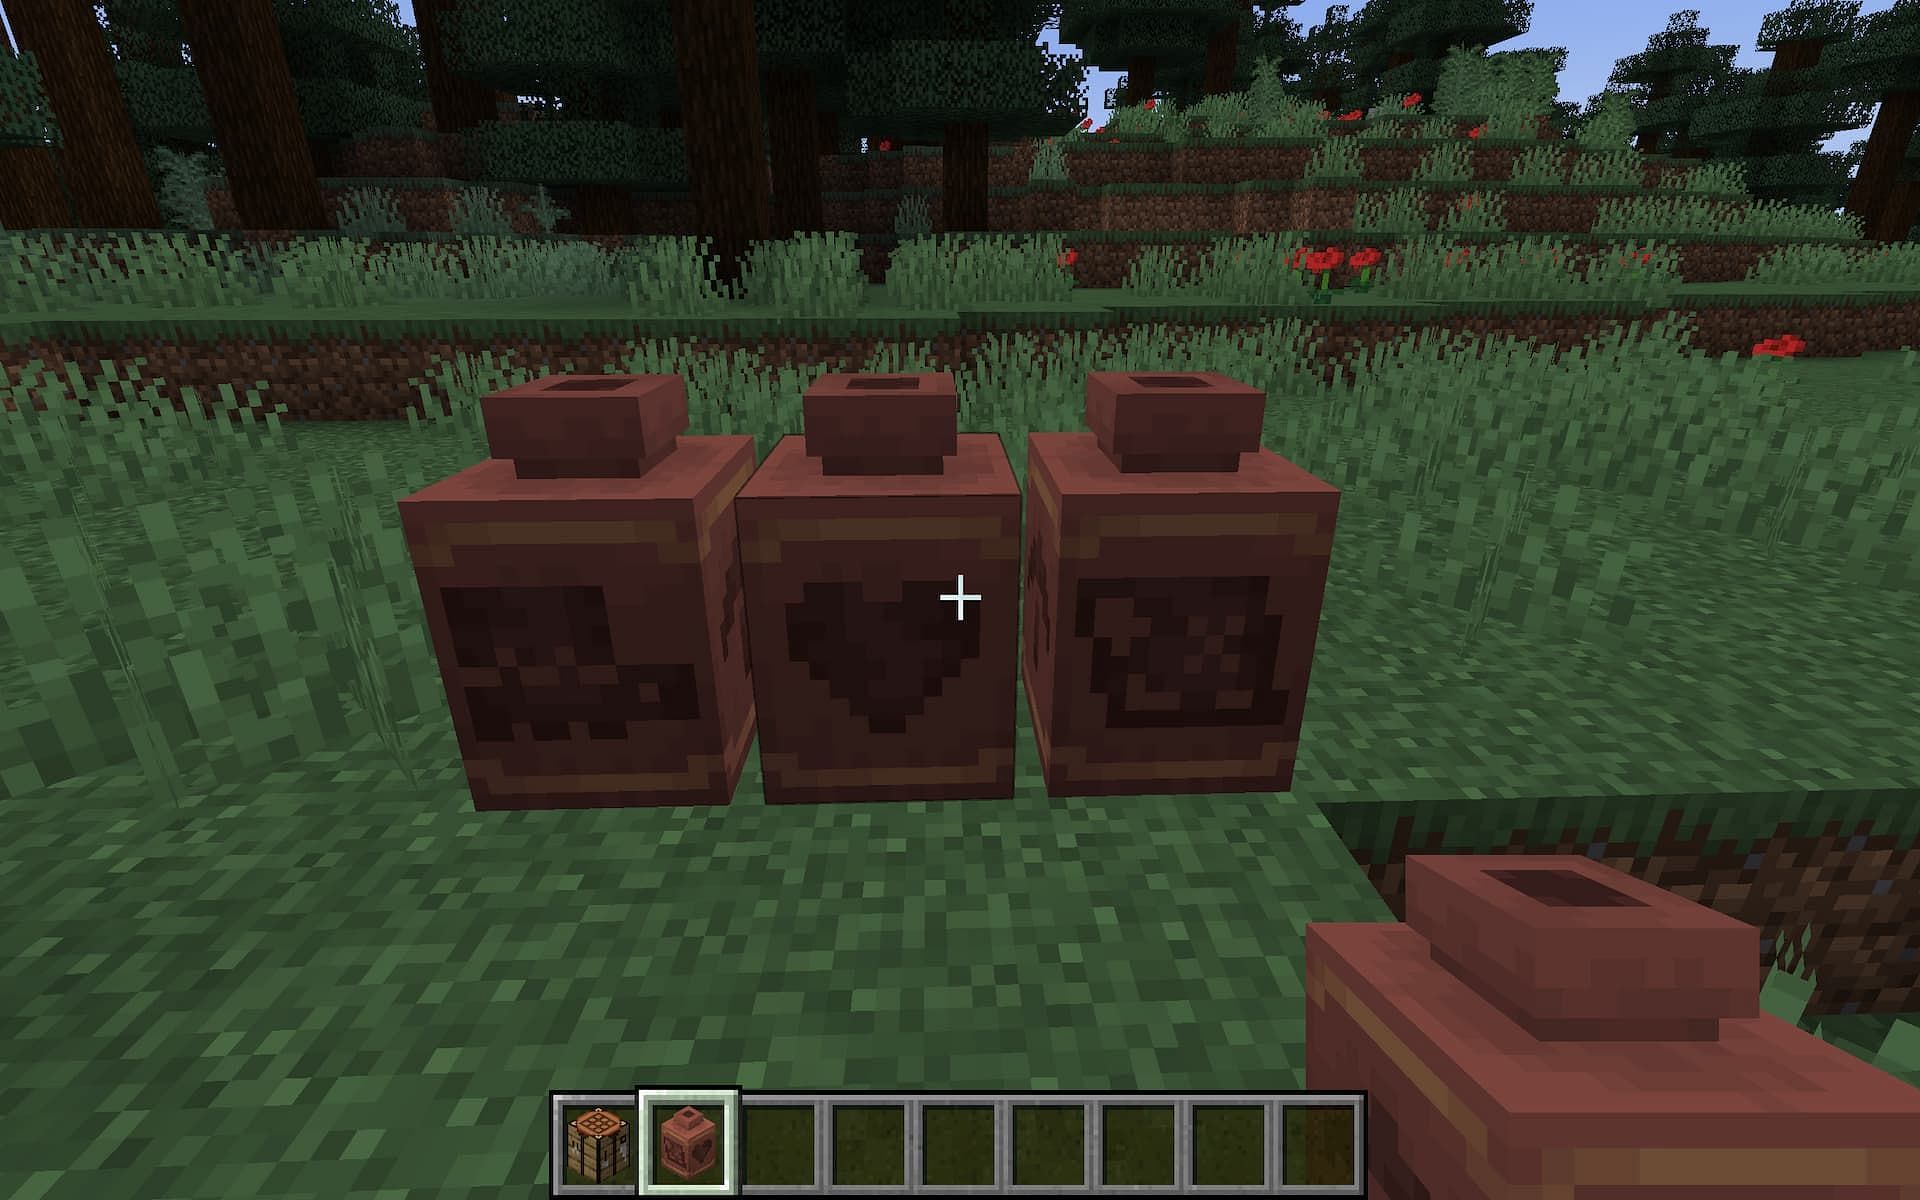 Players can make custom-decorated pots using pottery shards (Image via Minecraft)